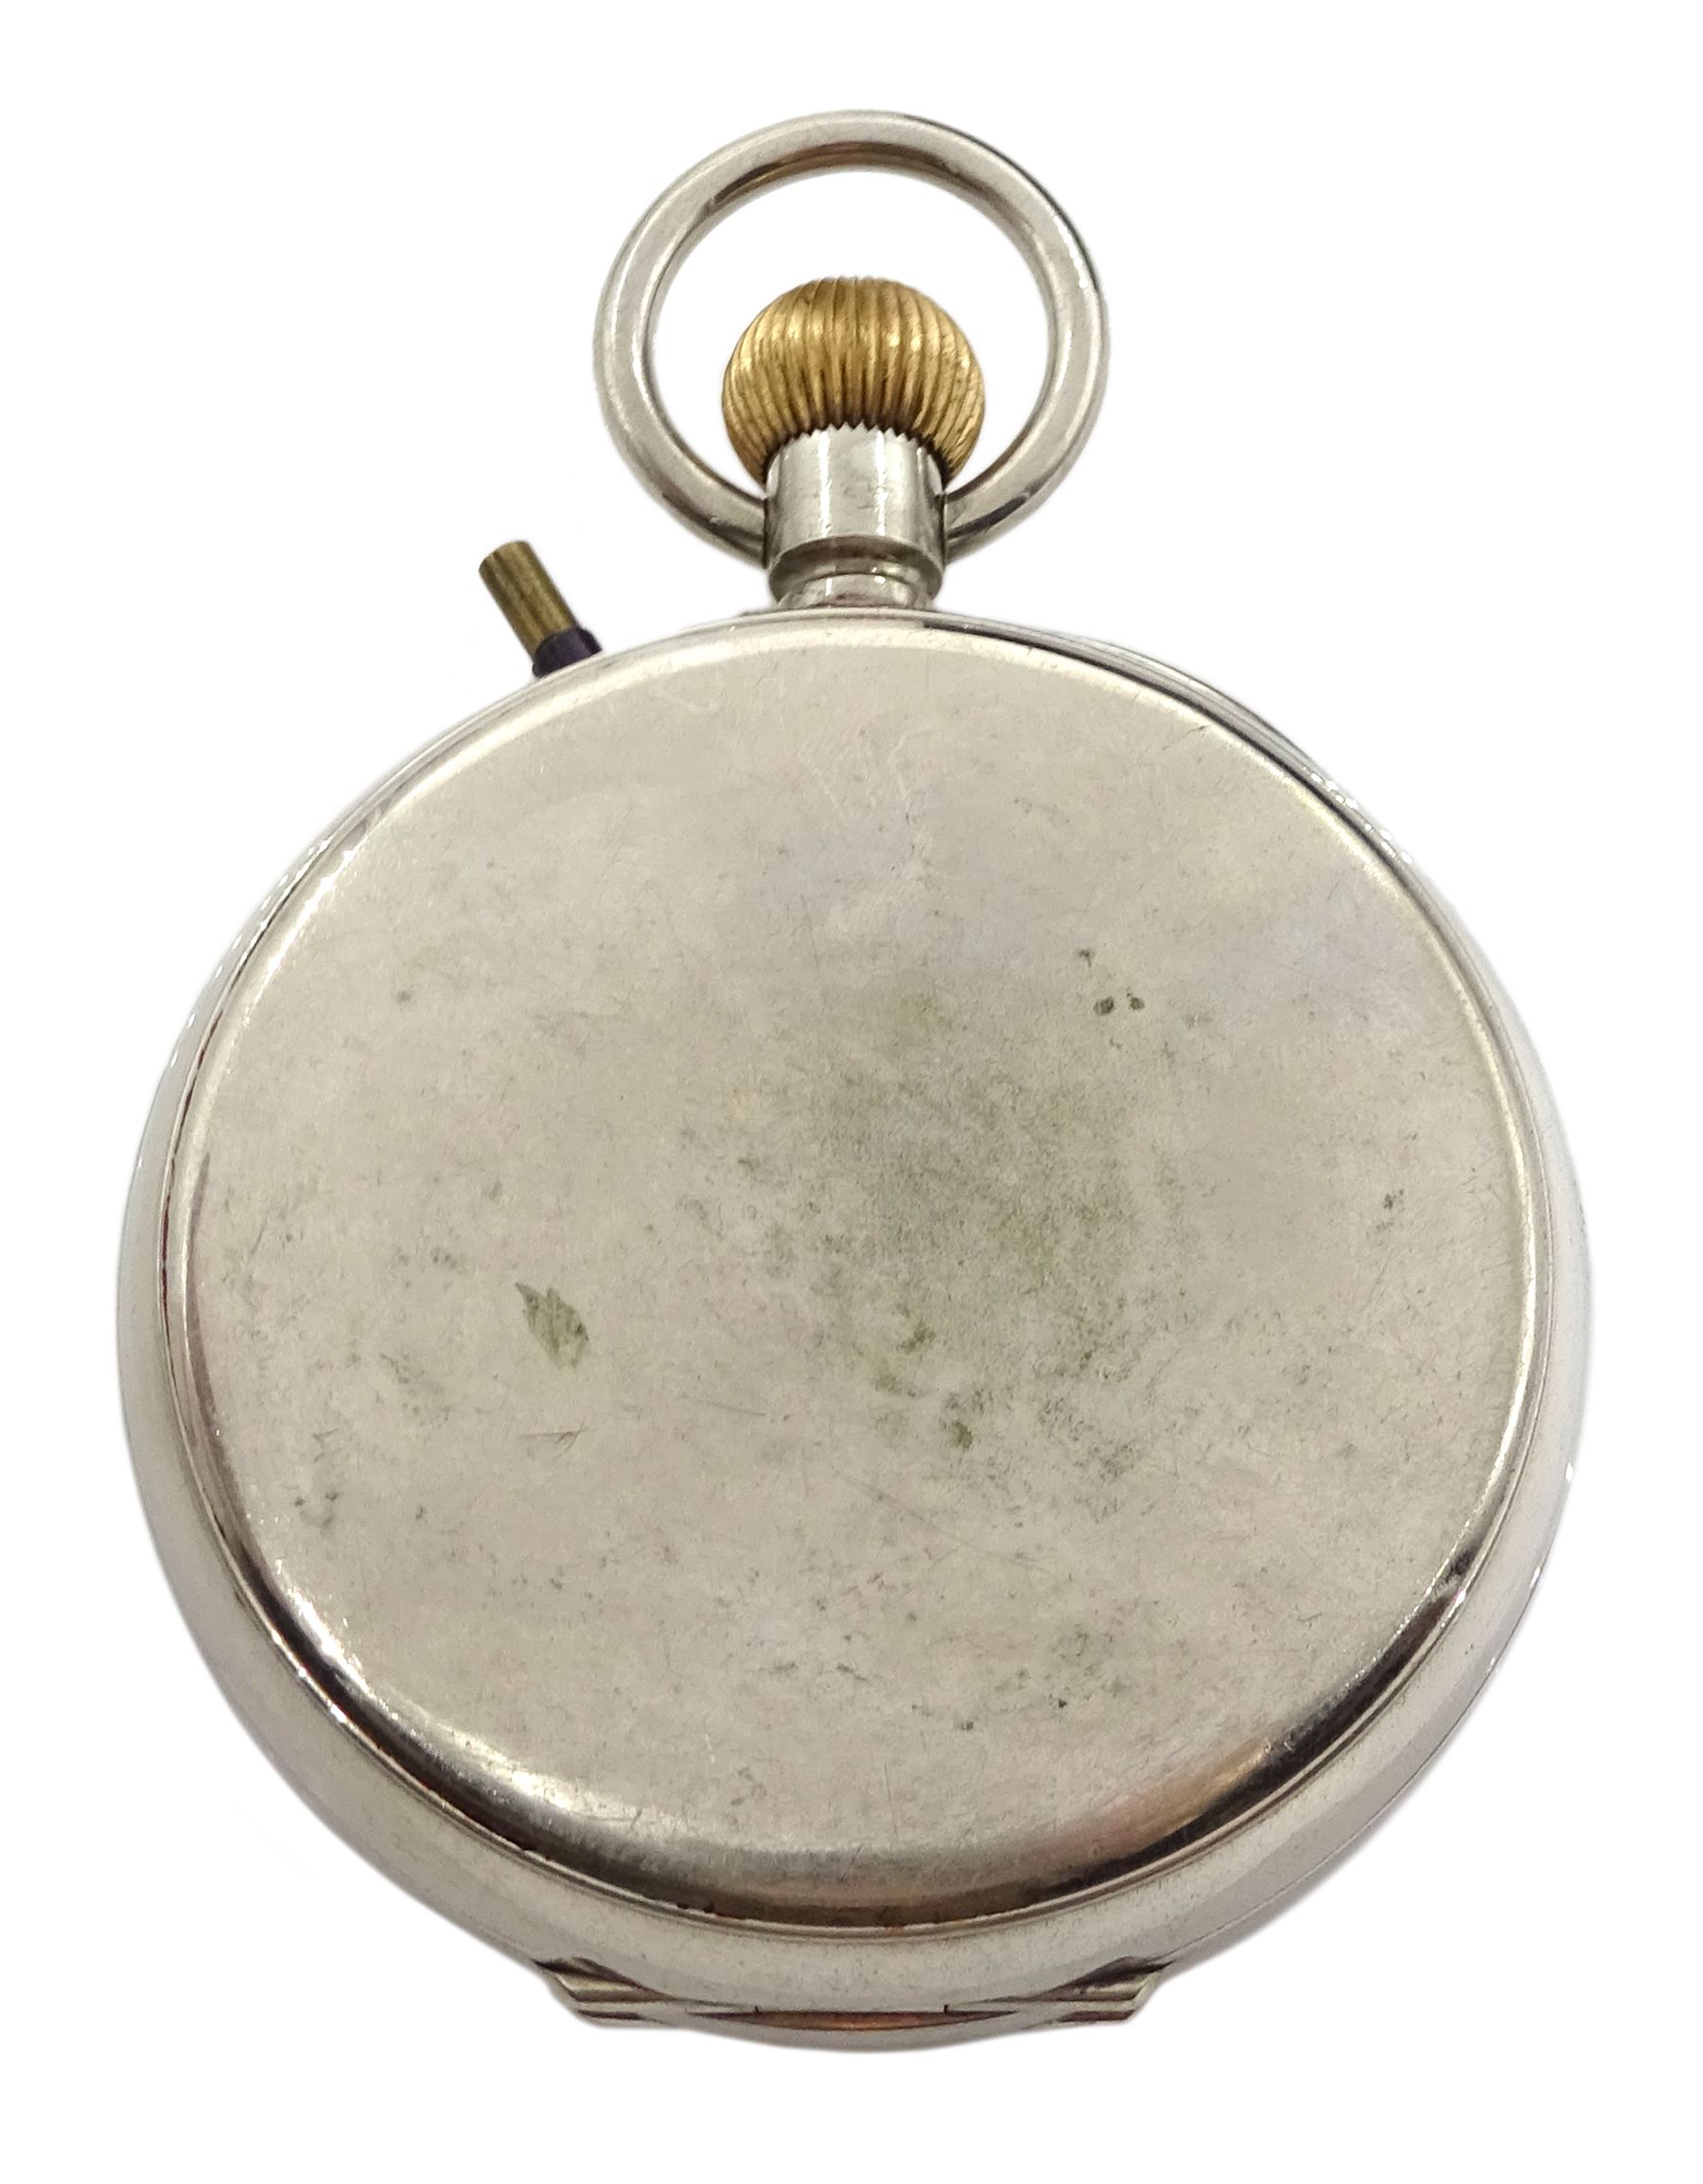 Early 20th century goliath keyless Swiss lever pocket watch by M M & Co - Image 3 of 6